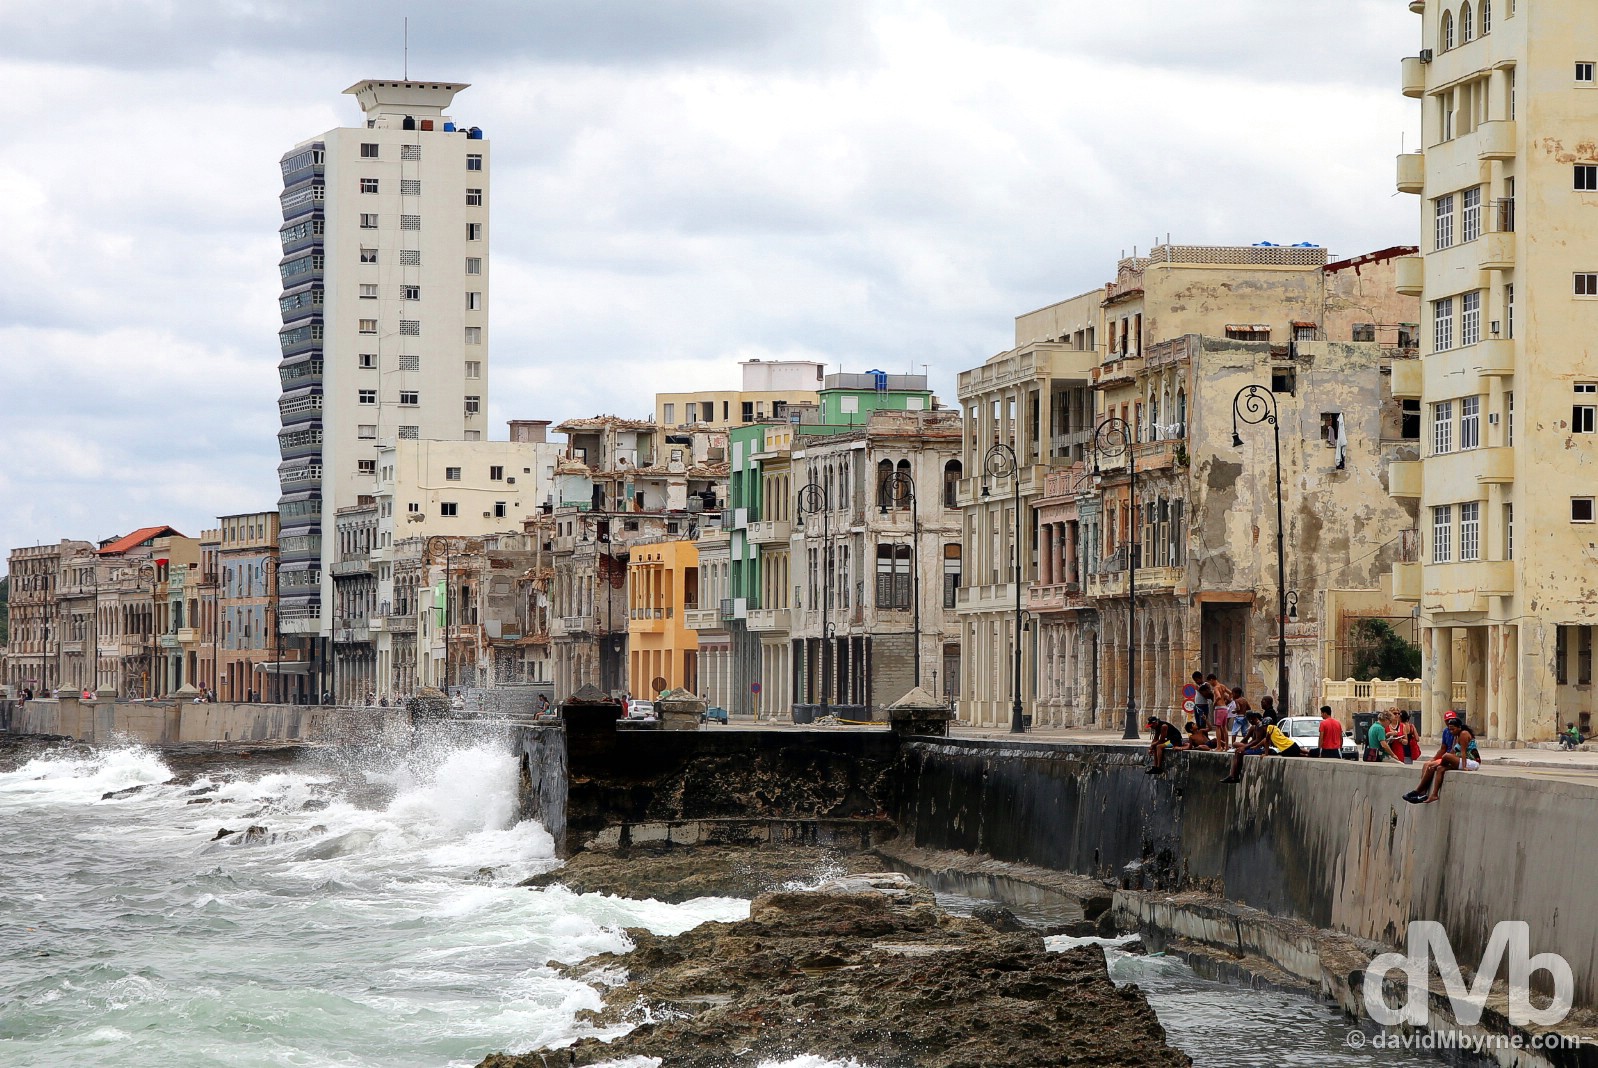 The wave-bashed Malecon in Havana, Cuba. May 1, 2015.